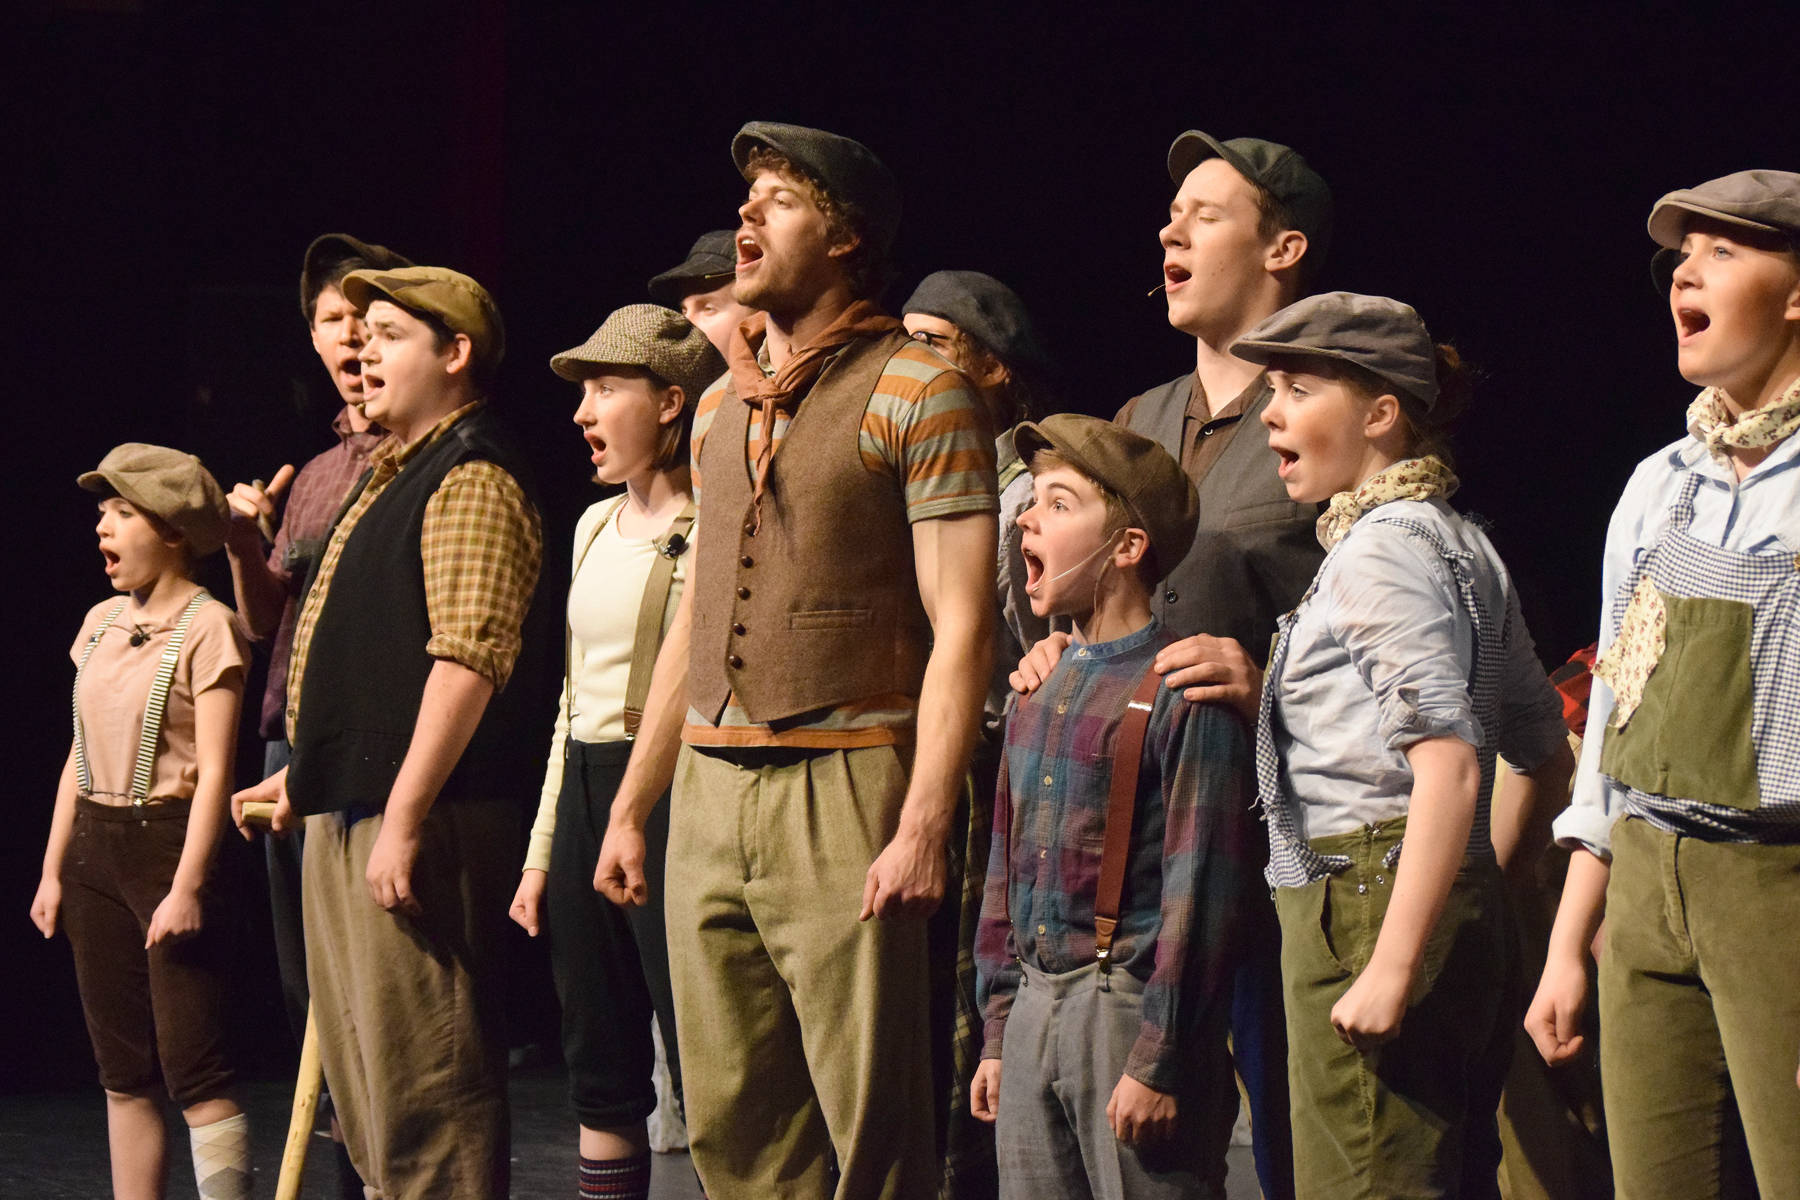 The cast of “Newsies” sings during rehearsal on Wednesday, April 24, 2019, at the Nikiski High School auditorium. (Photo by Joey Klecka/Peninsula Clarion)